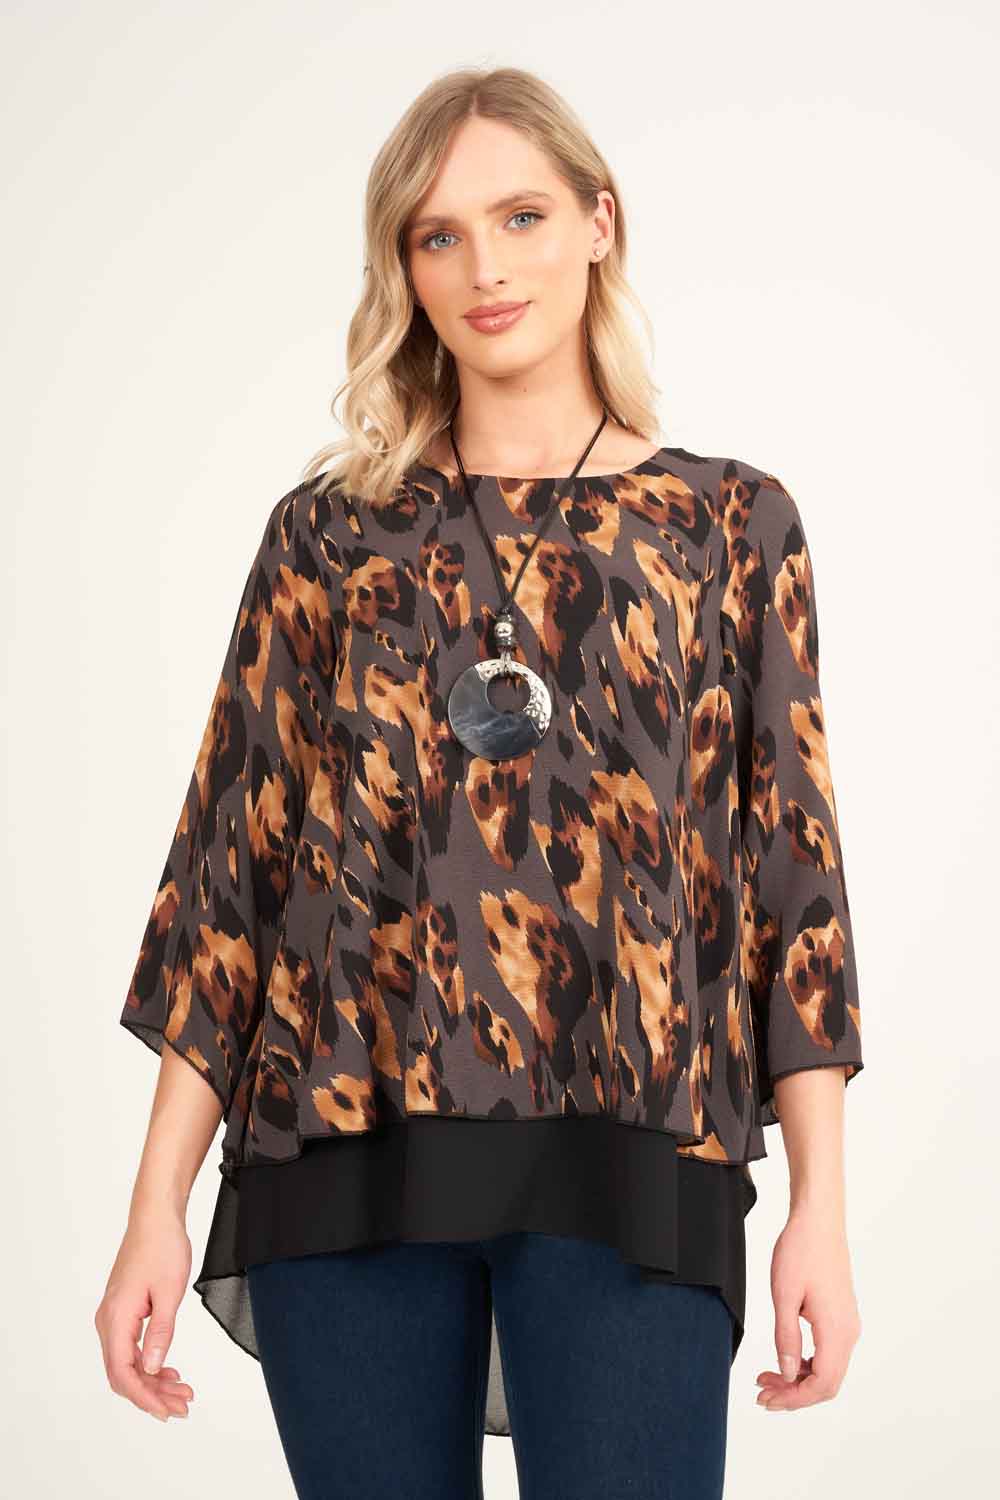 Saloos Animal Printed Layered Top With Necklace